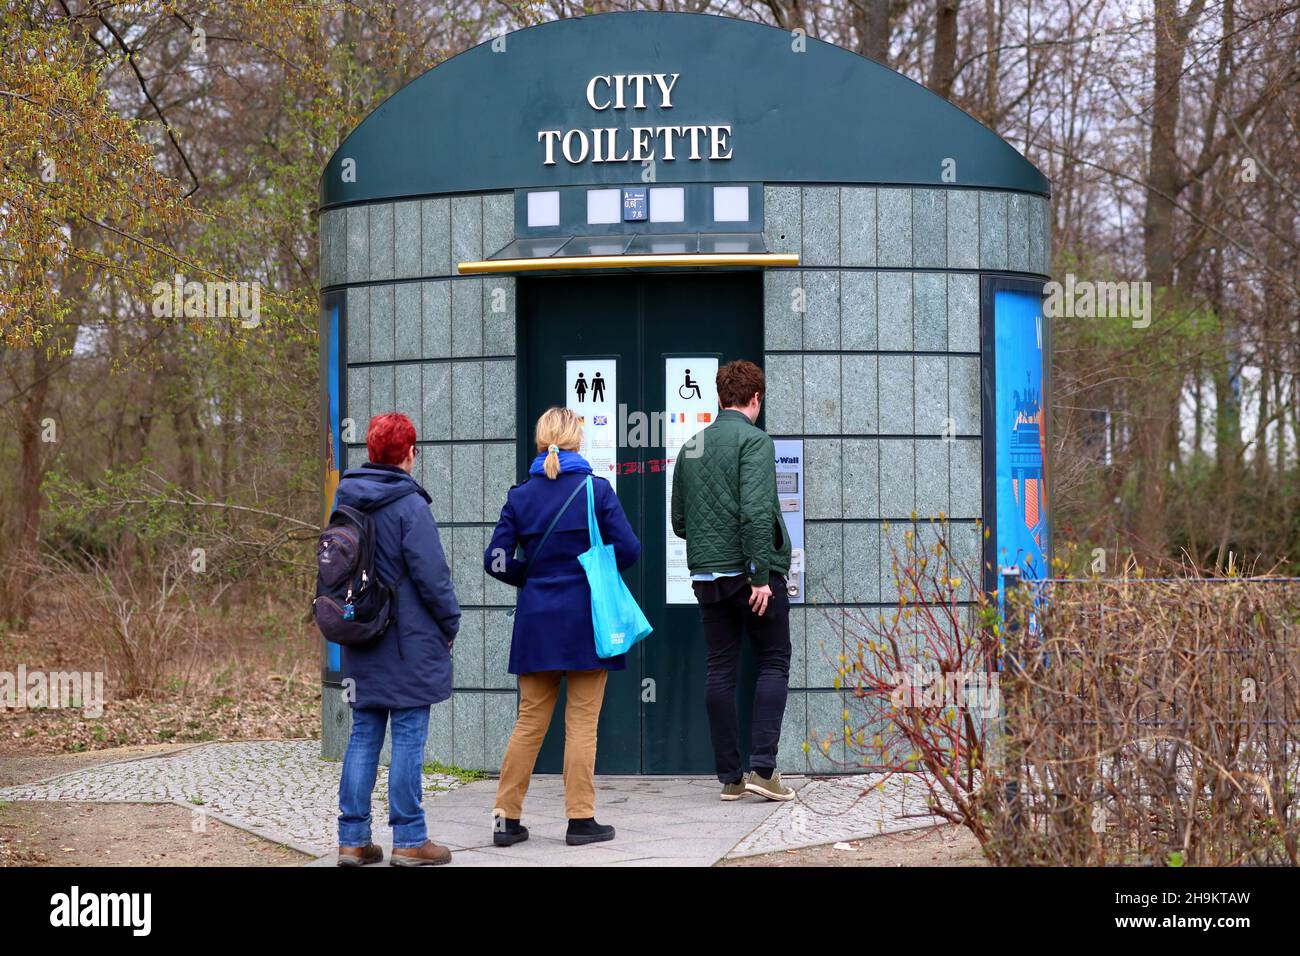 People que at an automatic self cleaning 'City Toilette' in Berlin, Germany. The public restrooms are pay toilets requiring a fee to use. Stock Photo